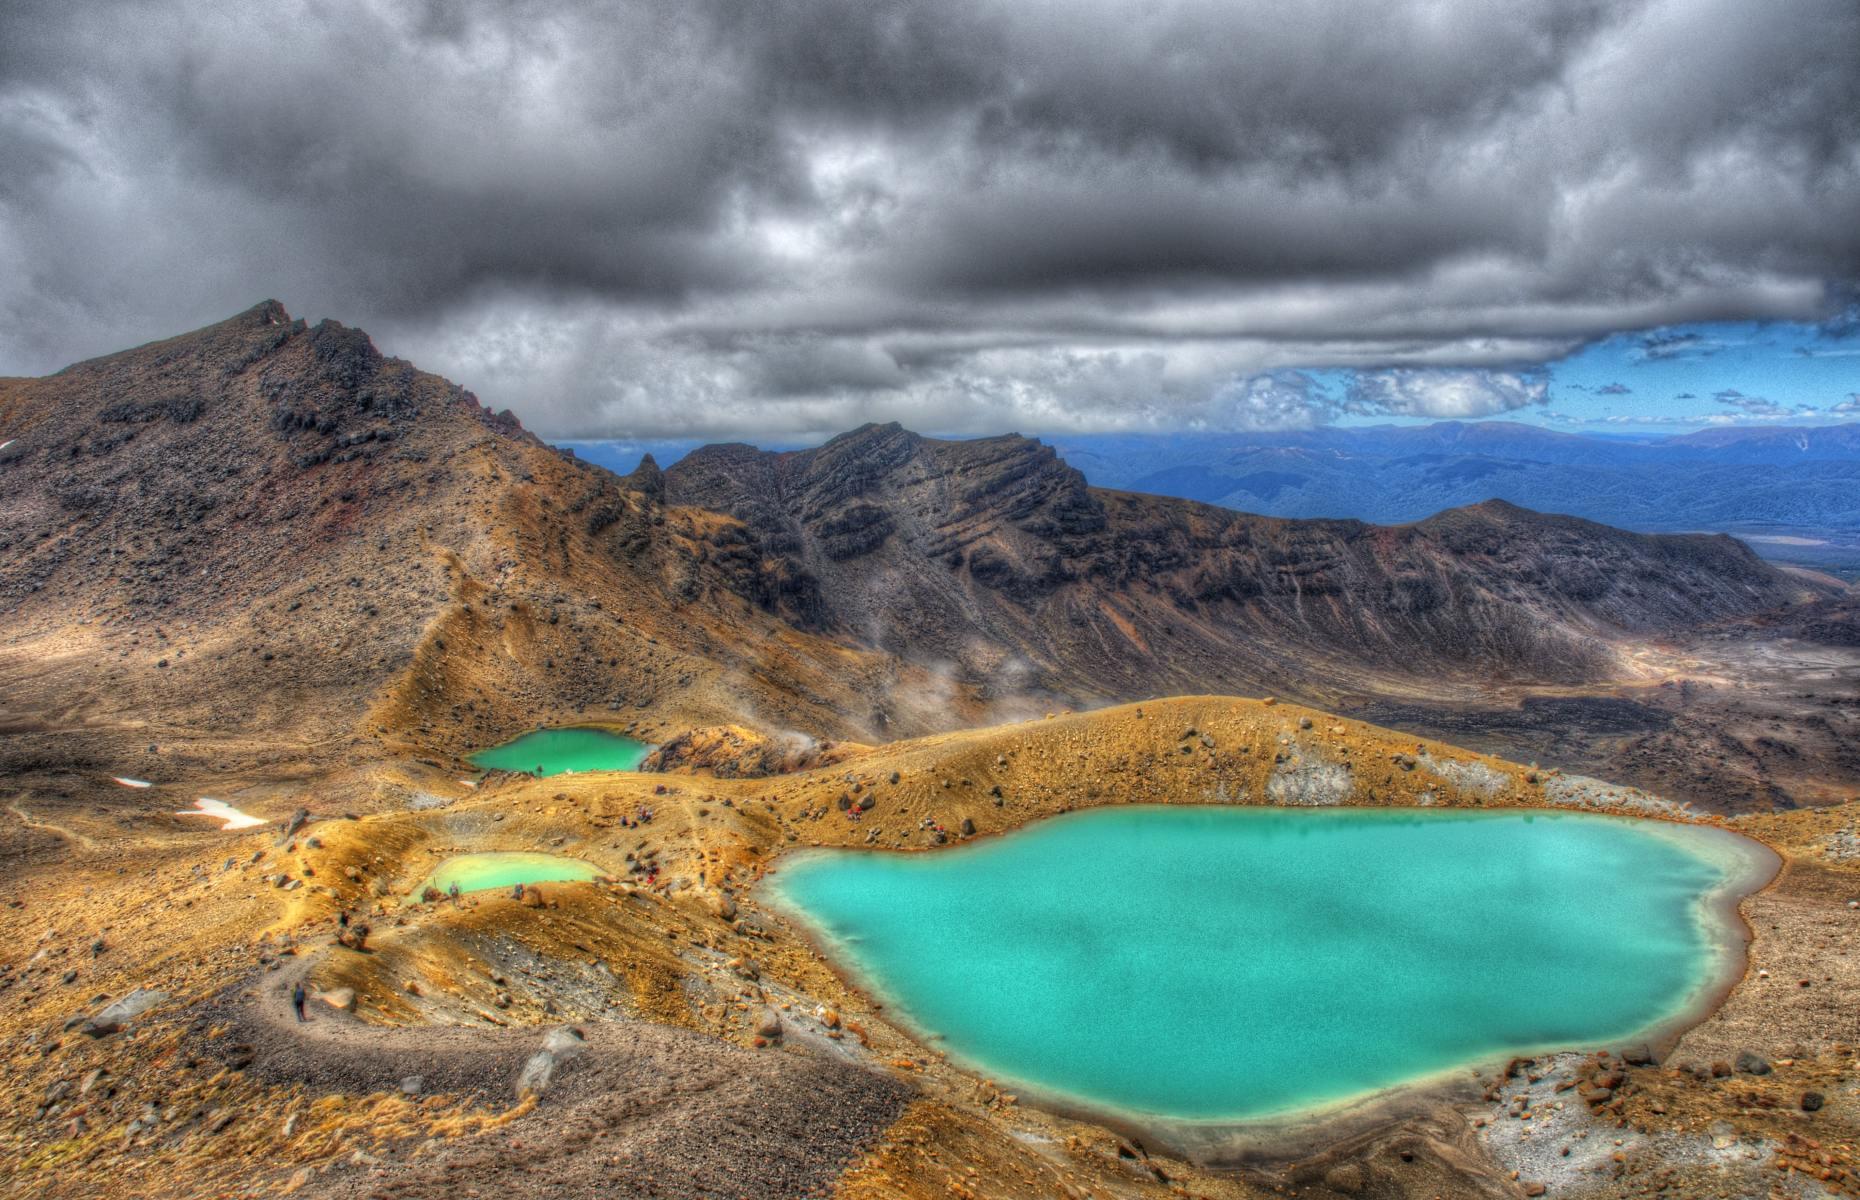 <p>The central North Island region features the one-day Tongariro Alpine Crossing. Famed for its views of magnificent lava fields, smoking craters, volcanic lakes and Mount Ngauruhoe (known as Mount Doom in <em>The Lord of the Rings</em>), it's lauded as one of the world's best one-day hikes. In winter, the track is covered in snow and ice. The hike takes six to eight hours to complete and covers around 12 miles (19.4km). Note that it's a point-to-point hike, so travelers are advised to arrange pick-up at the end of the trail.</p>